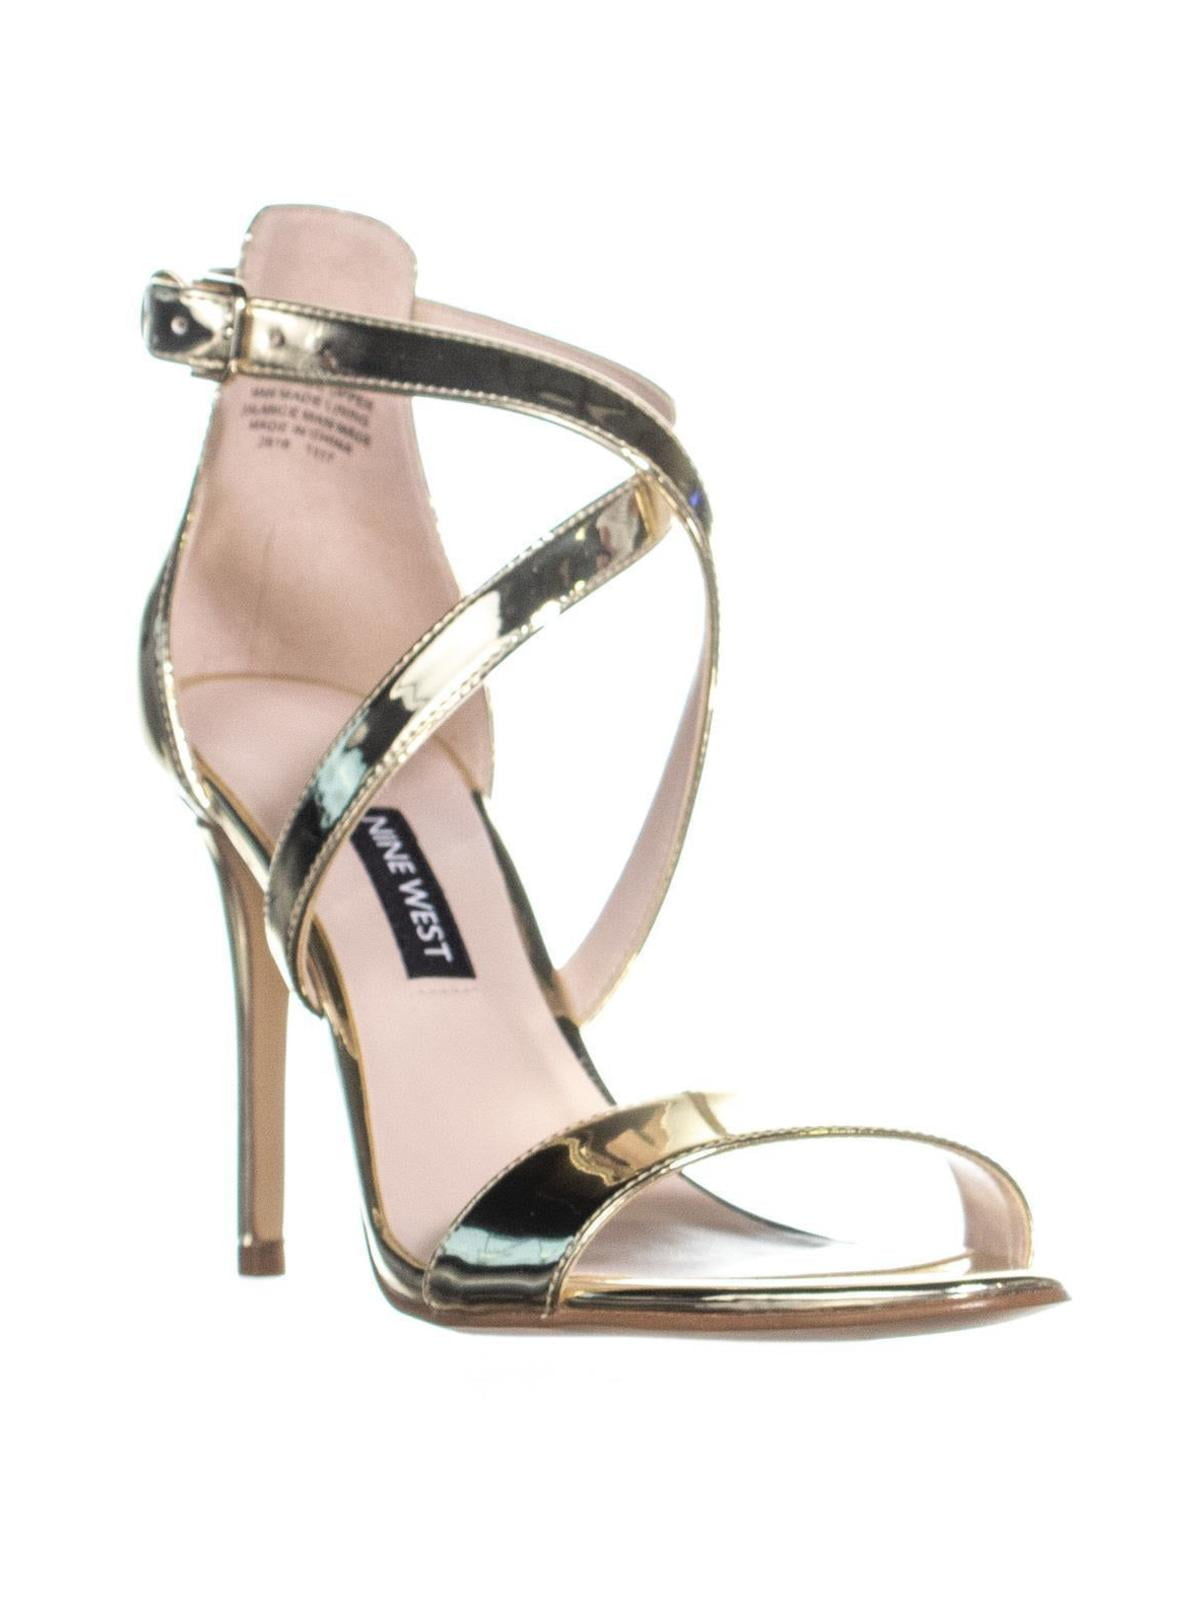 mydebut open toe sandals